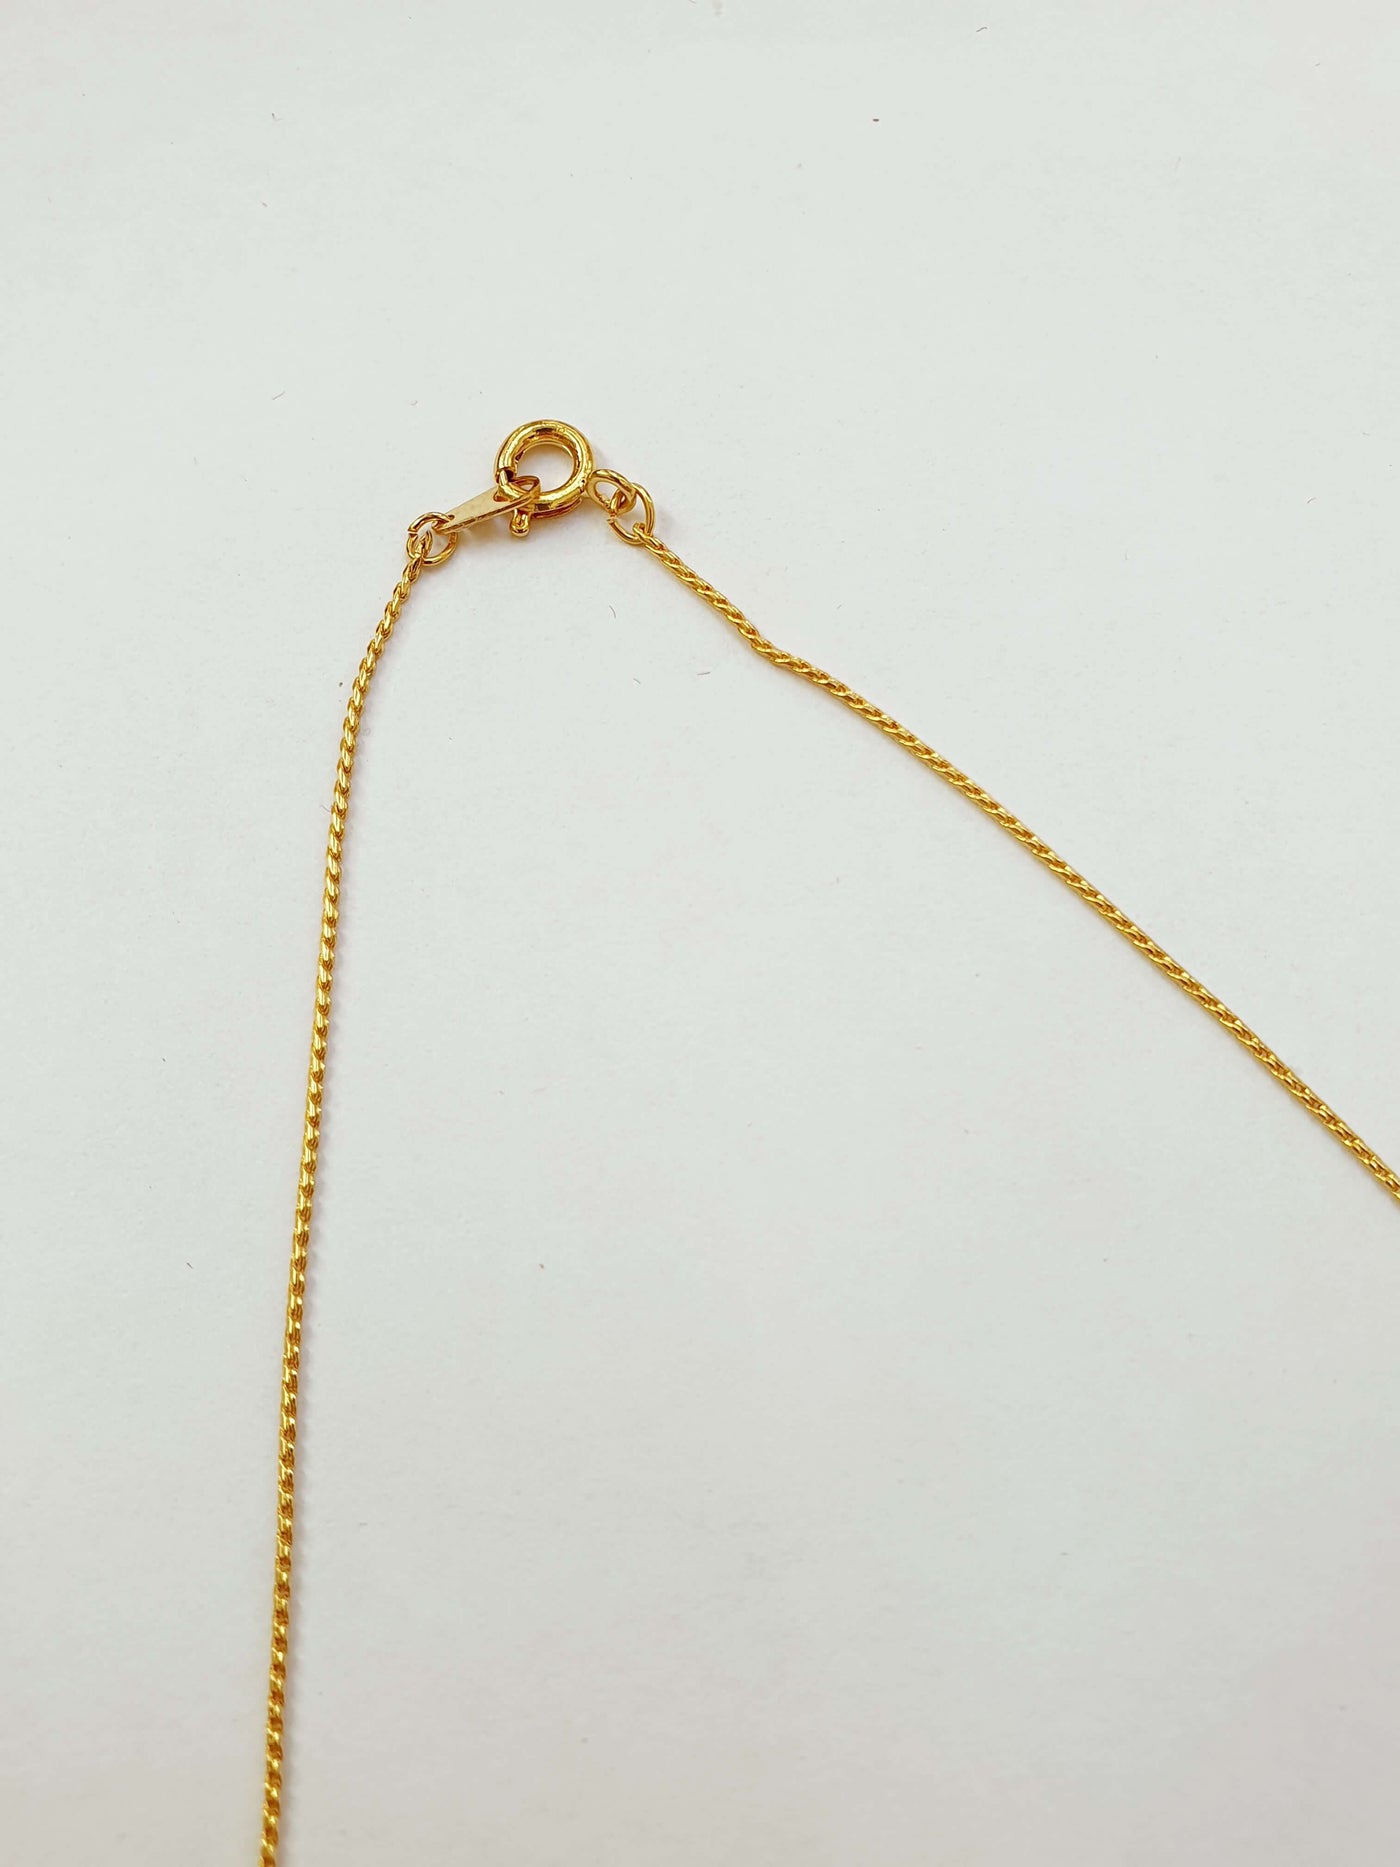 Vintage Gold Plated Fine Chain Necklace with Beads - Pink